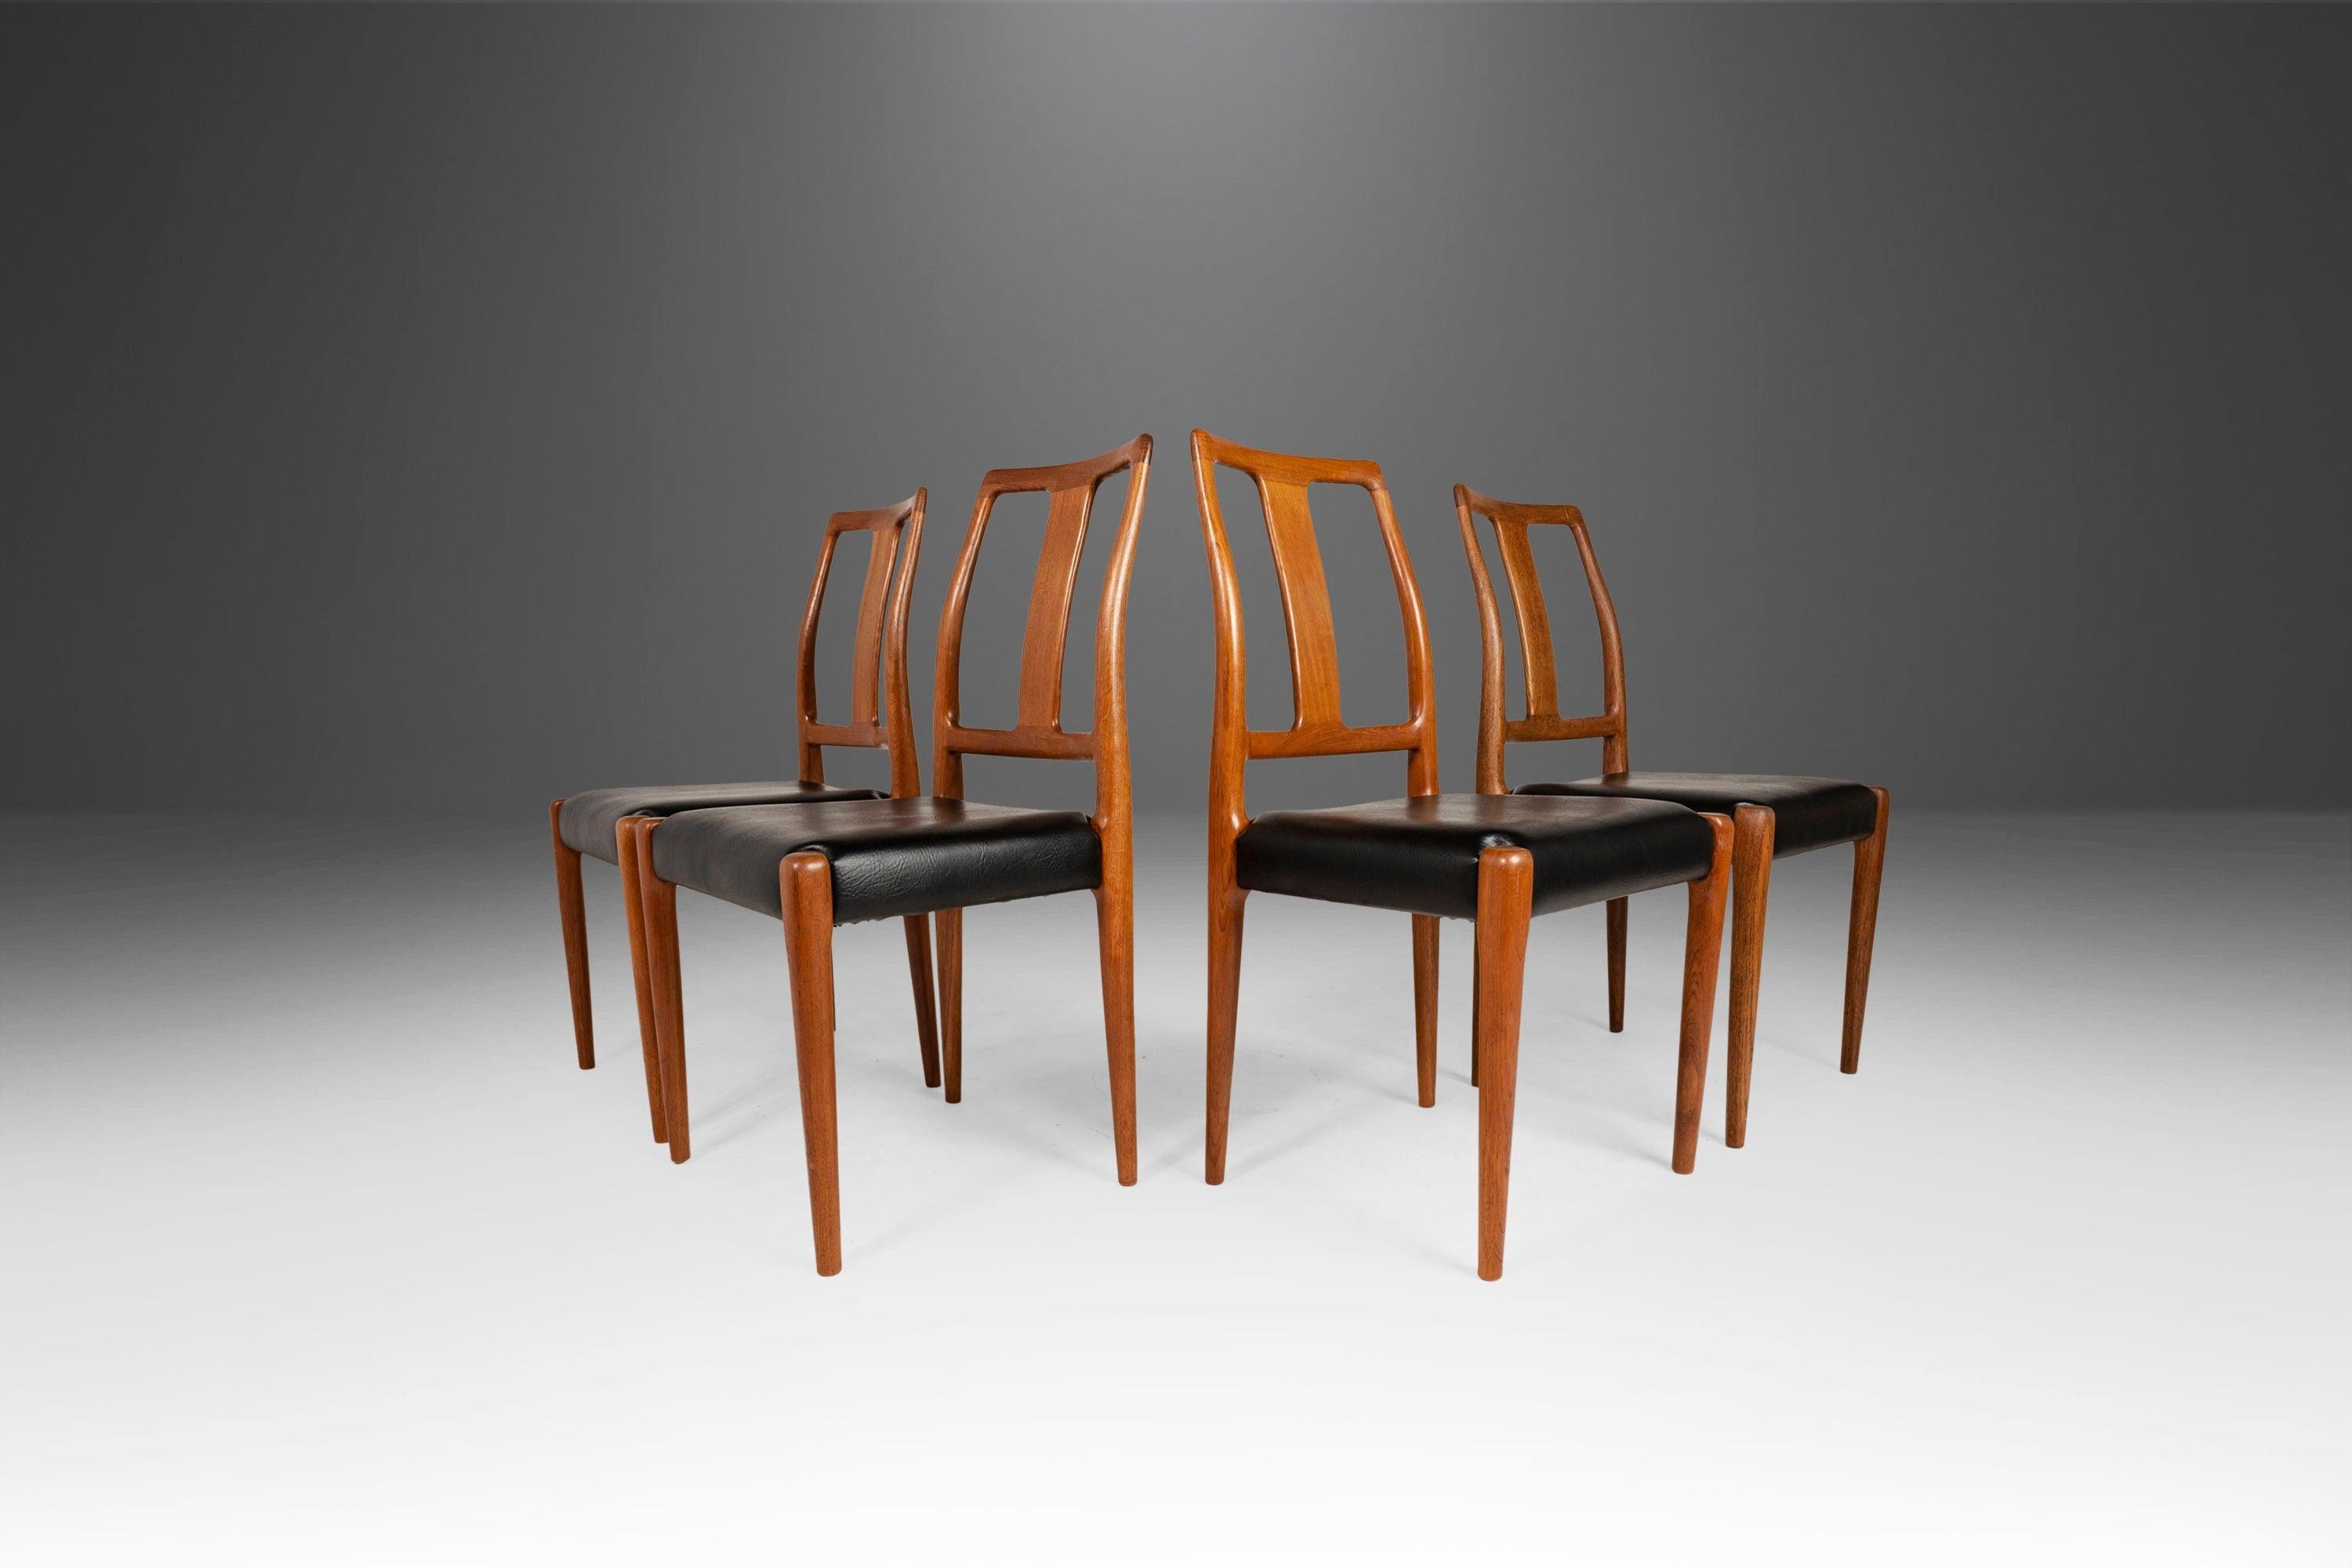 Equal parts comfort and style this visually stunning set of dining chairs, produced by D-SCAN and styled after Johannes Andersen are the epitome of Scandinavian Minimalism. Constructed of solid teak with exceptional woodgrains and featuring gently